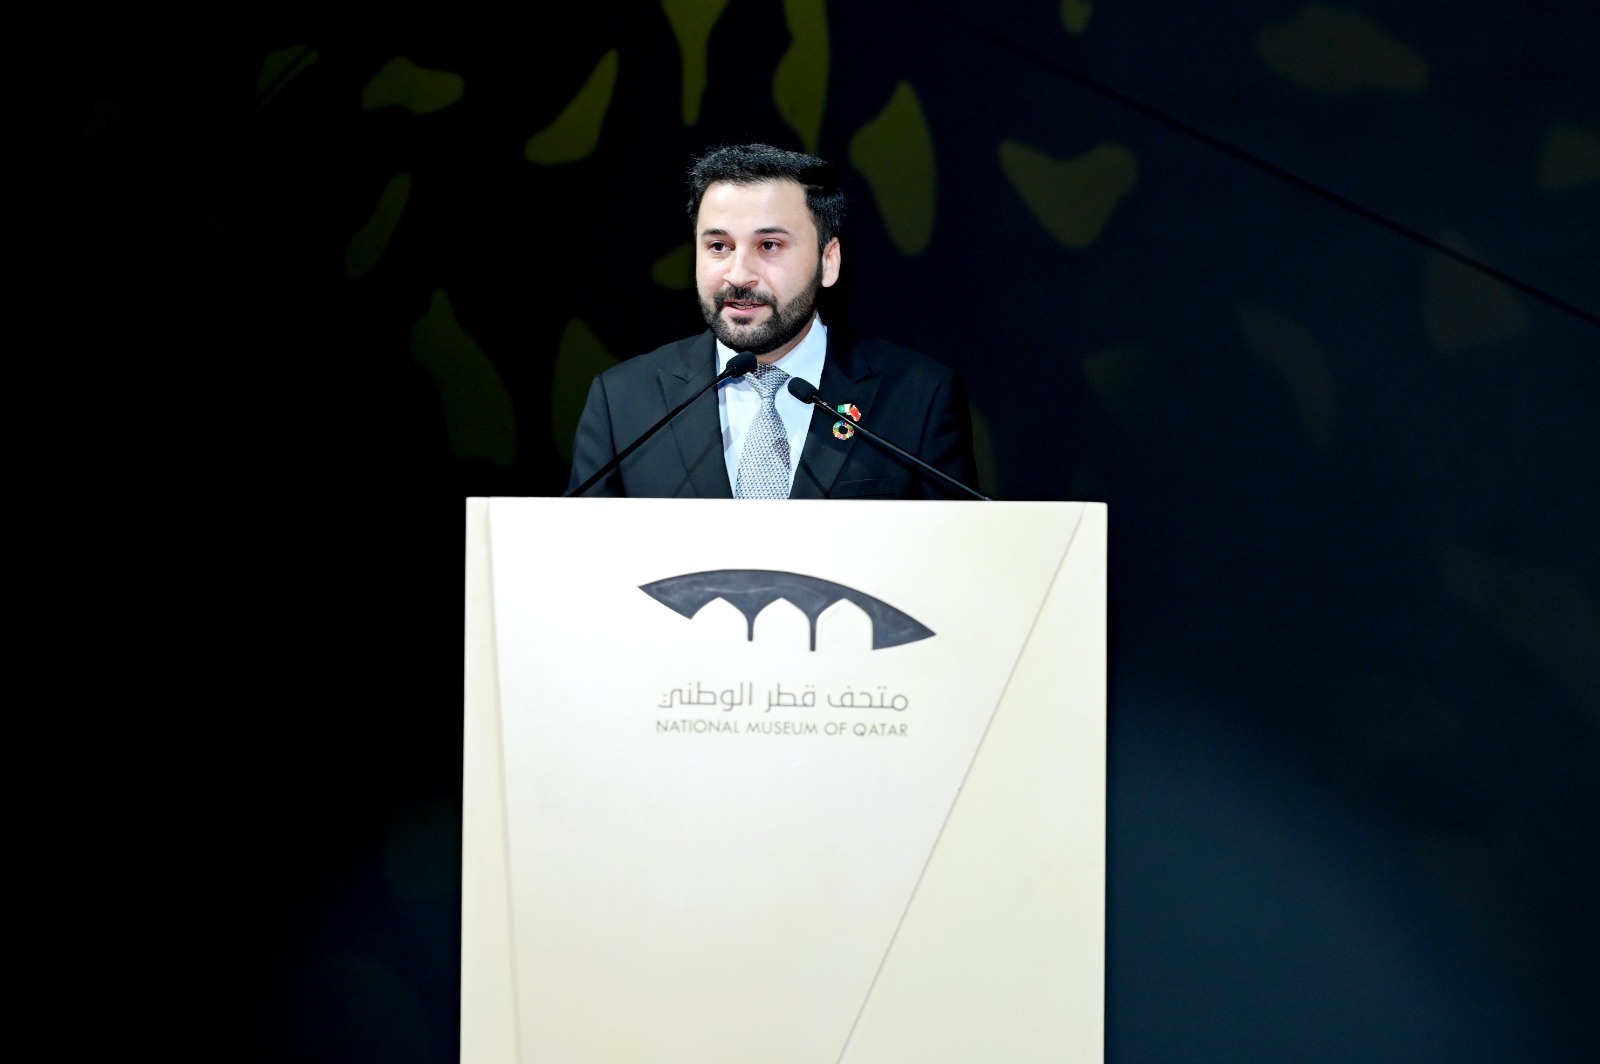 From Doha to the World: Grand Launch of International Companies at Qatar National Museum - PHOTOS